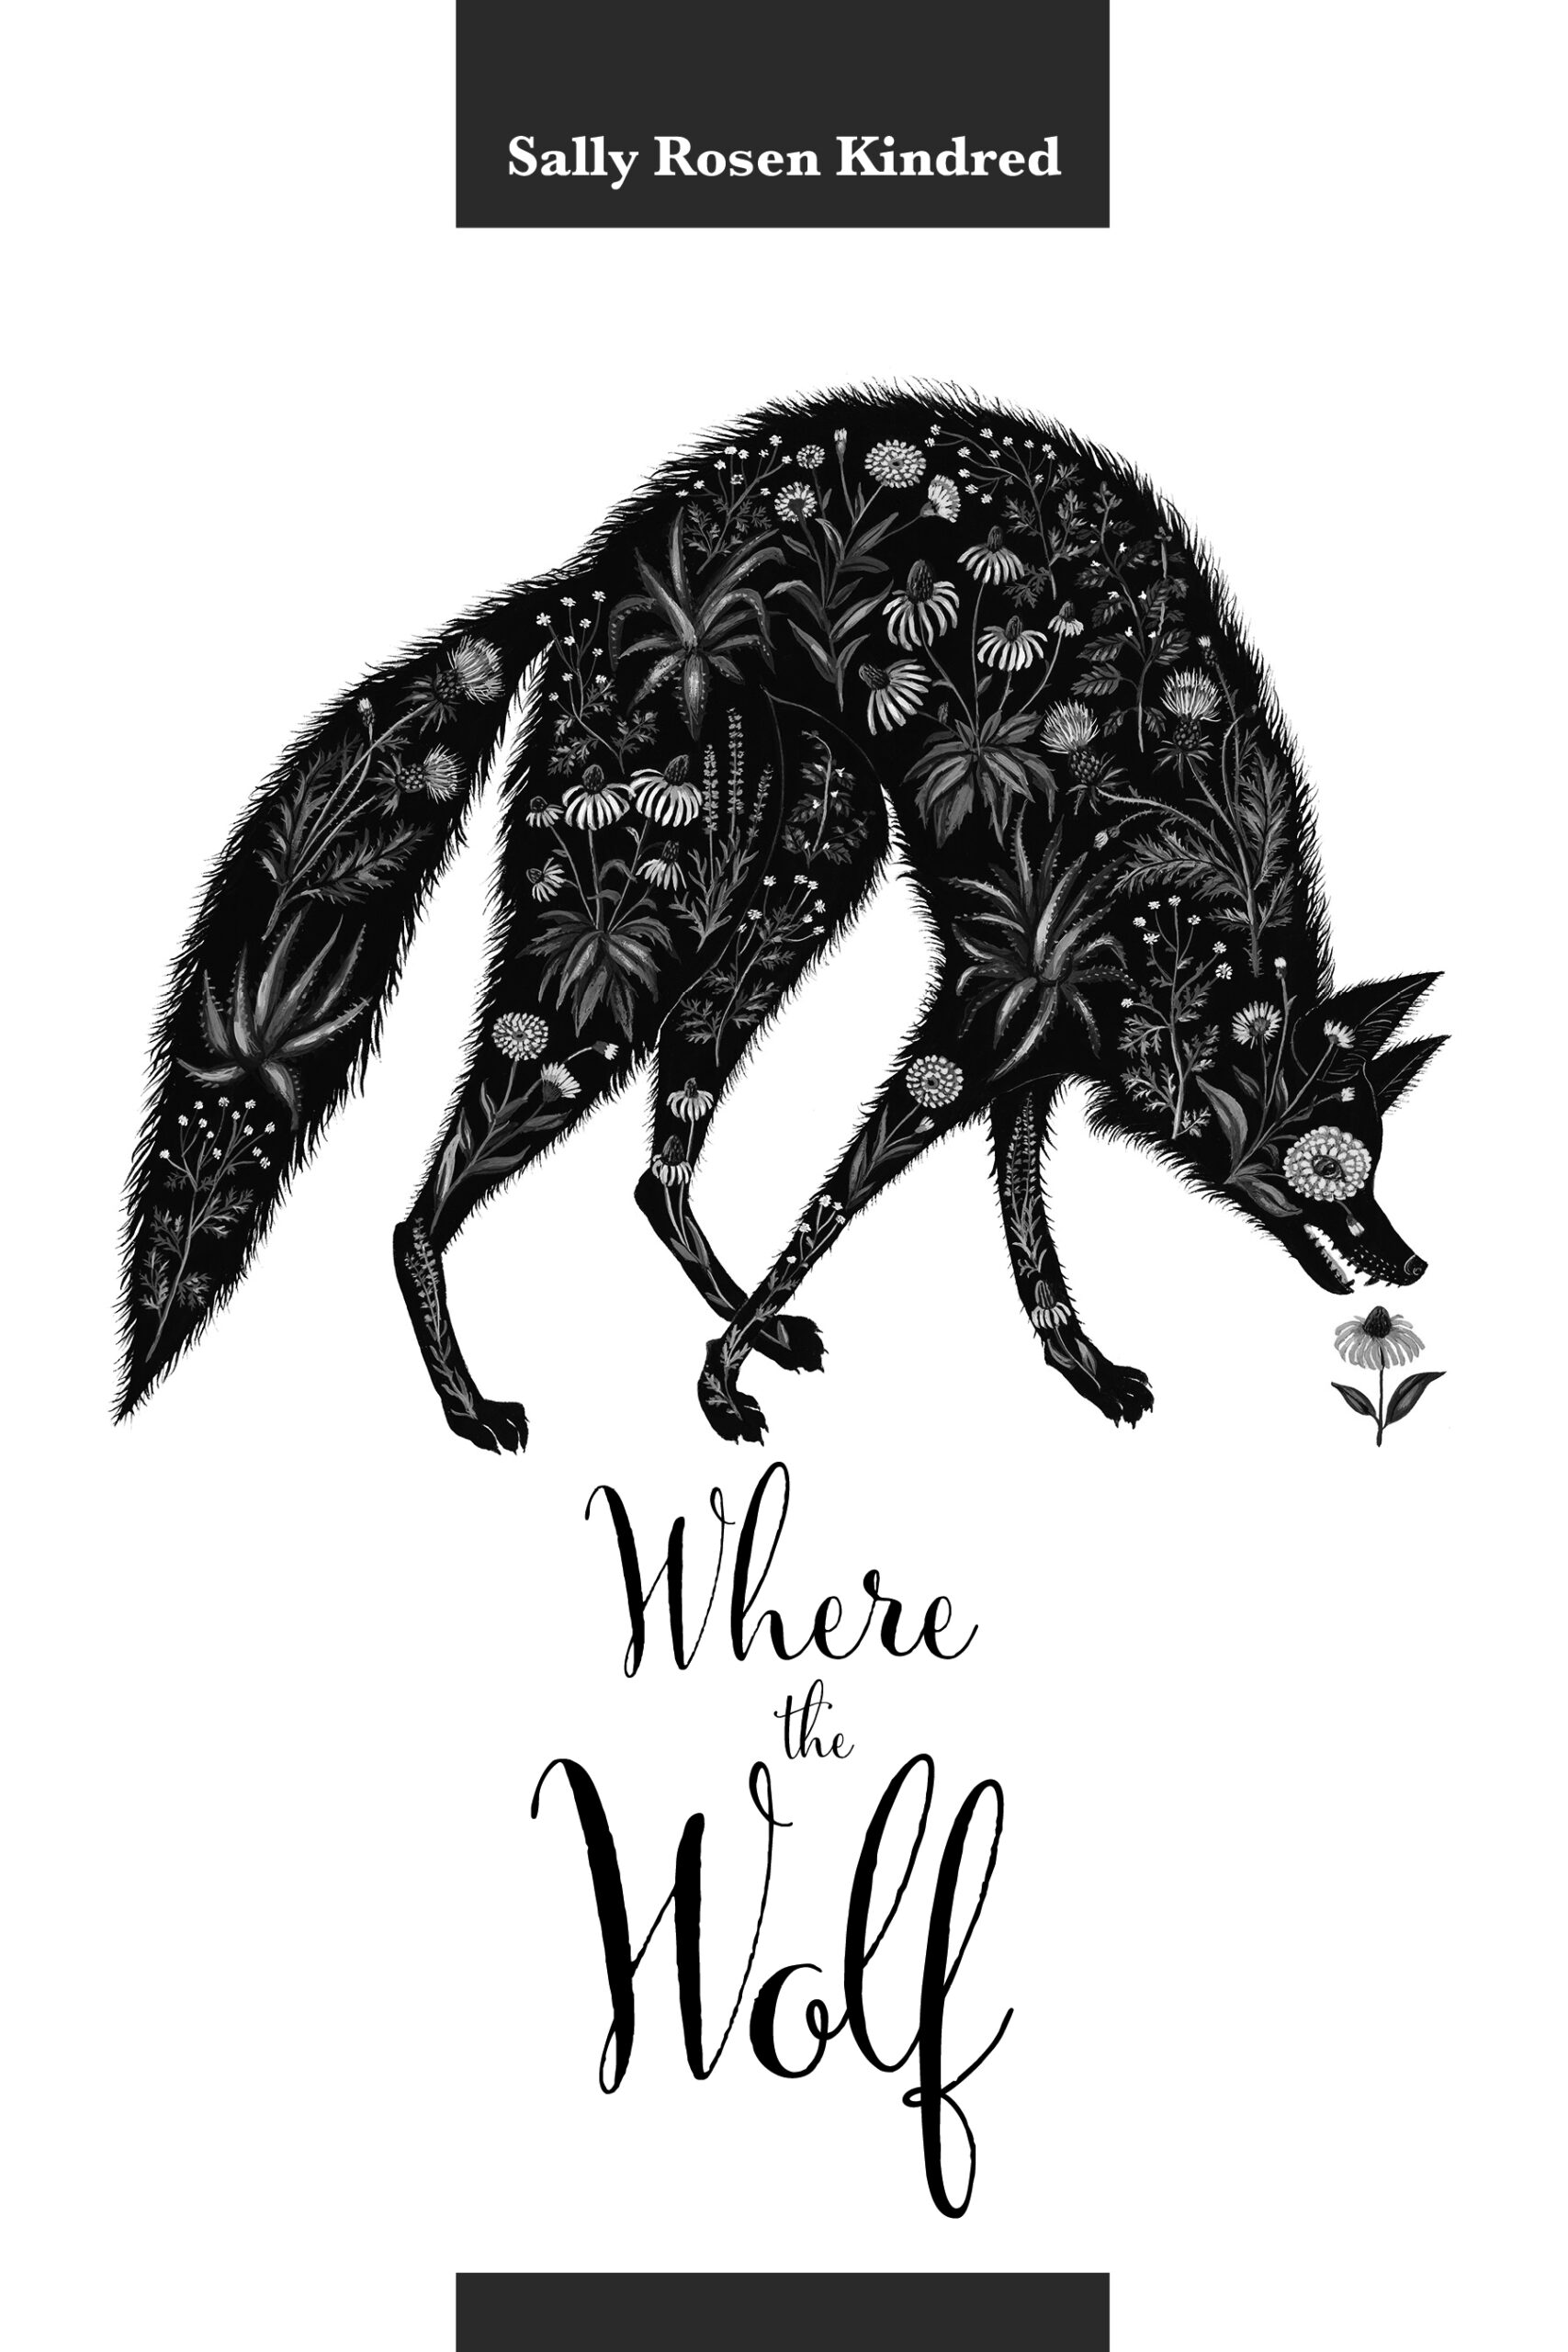 Book cover for poetry collection Where the Wolf